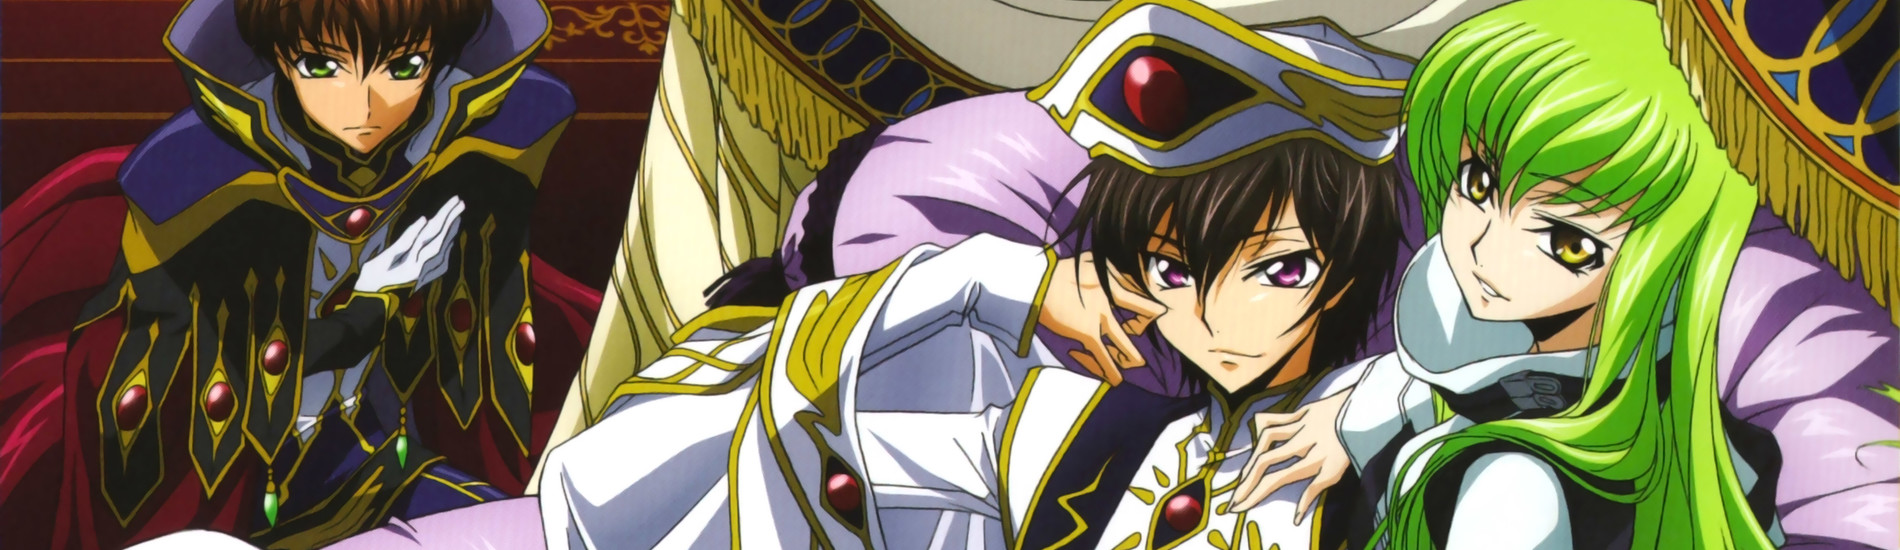 Code Geass: Lelouch of the Rebellion r2 Cover